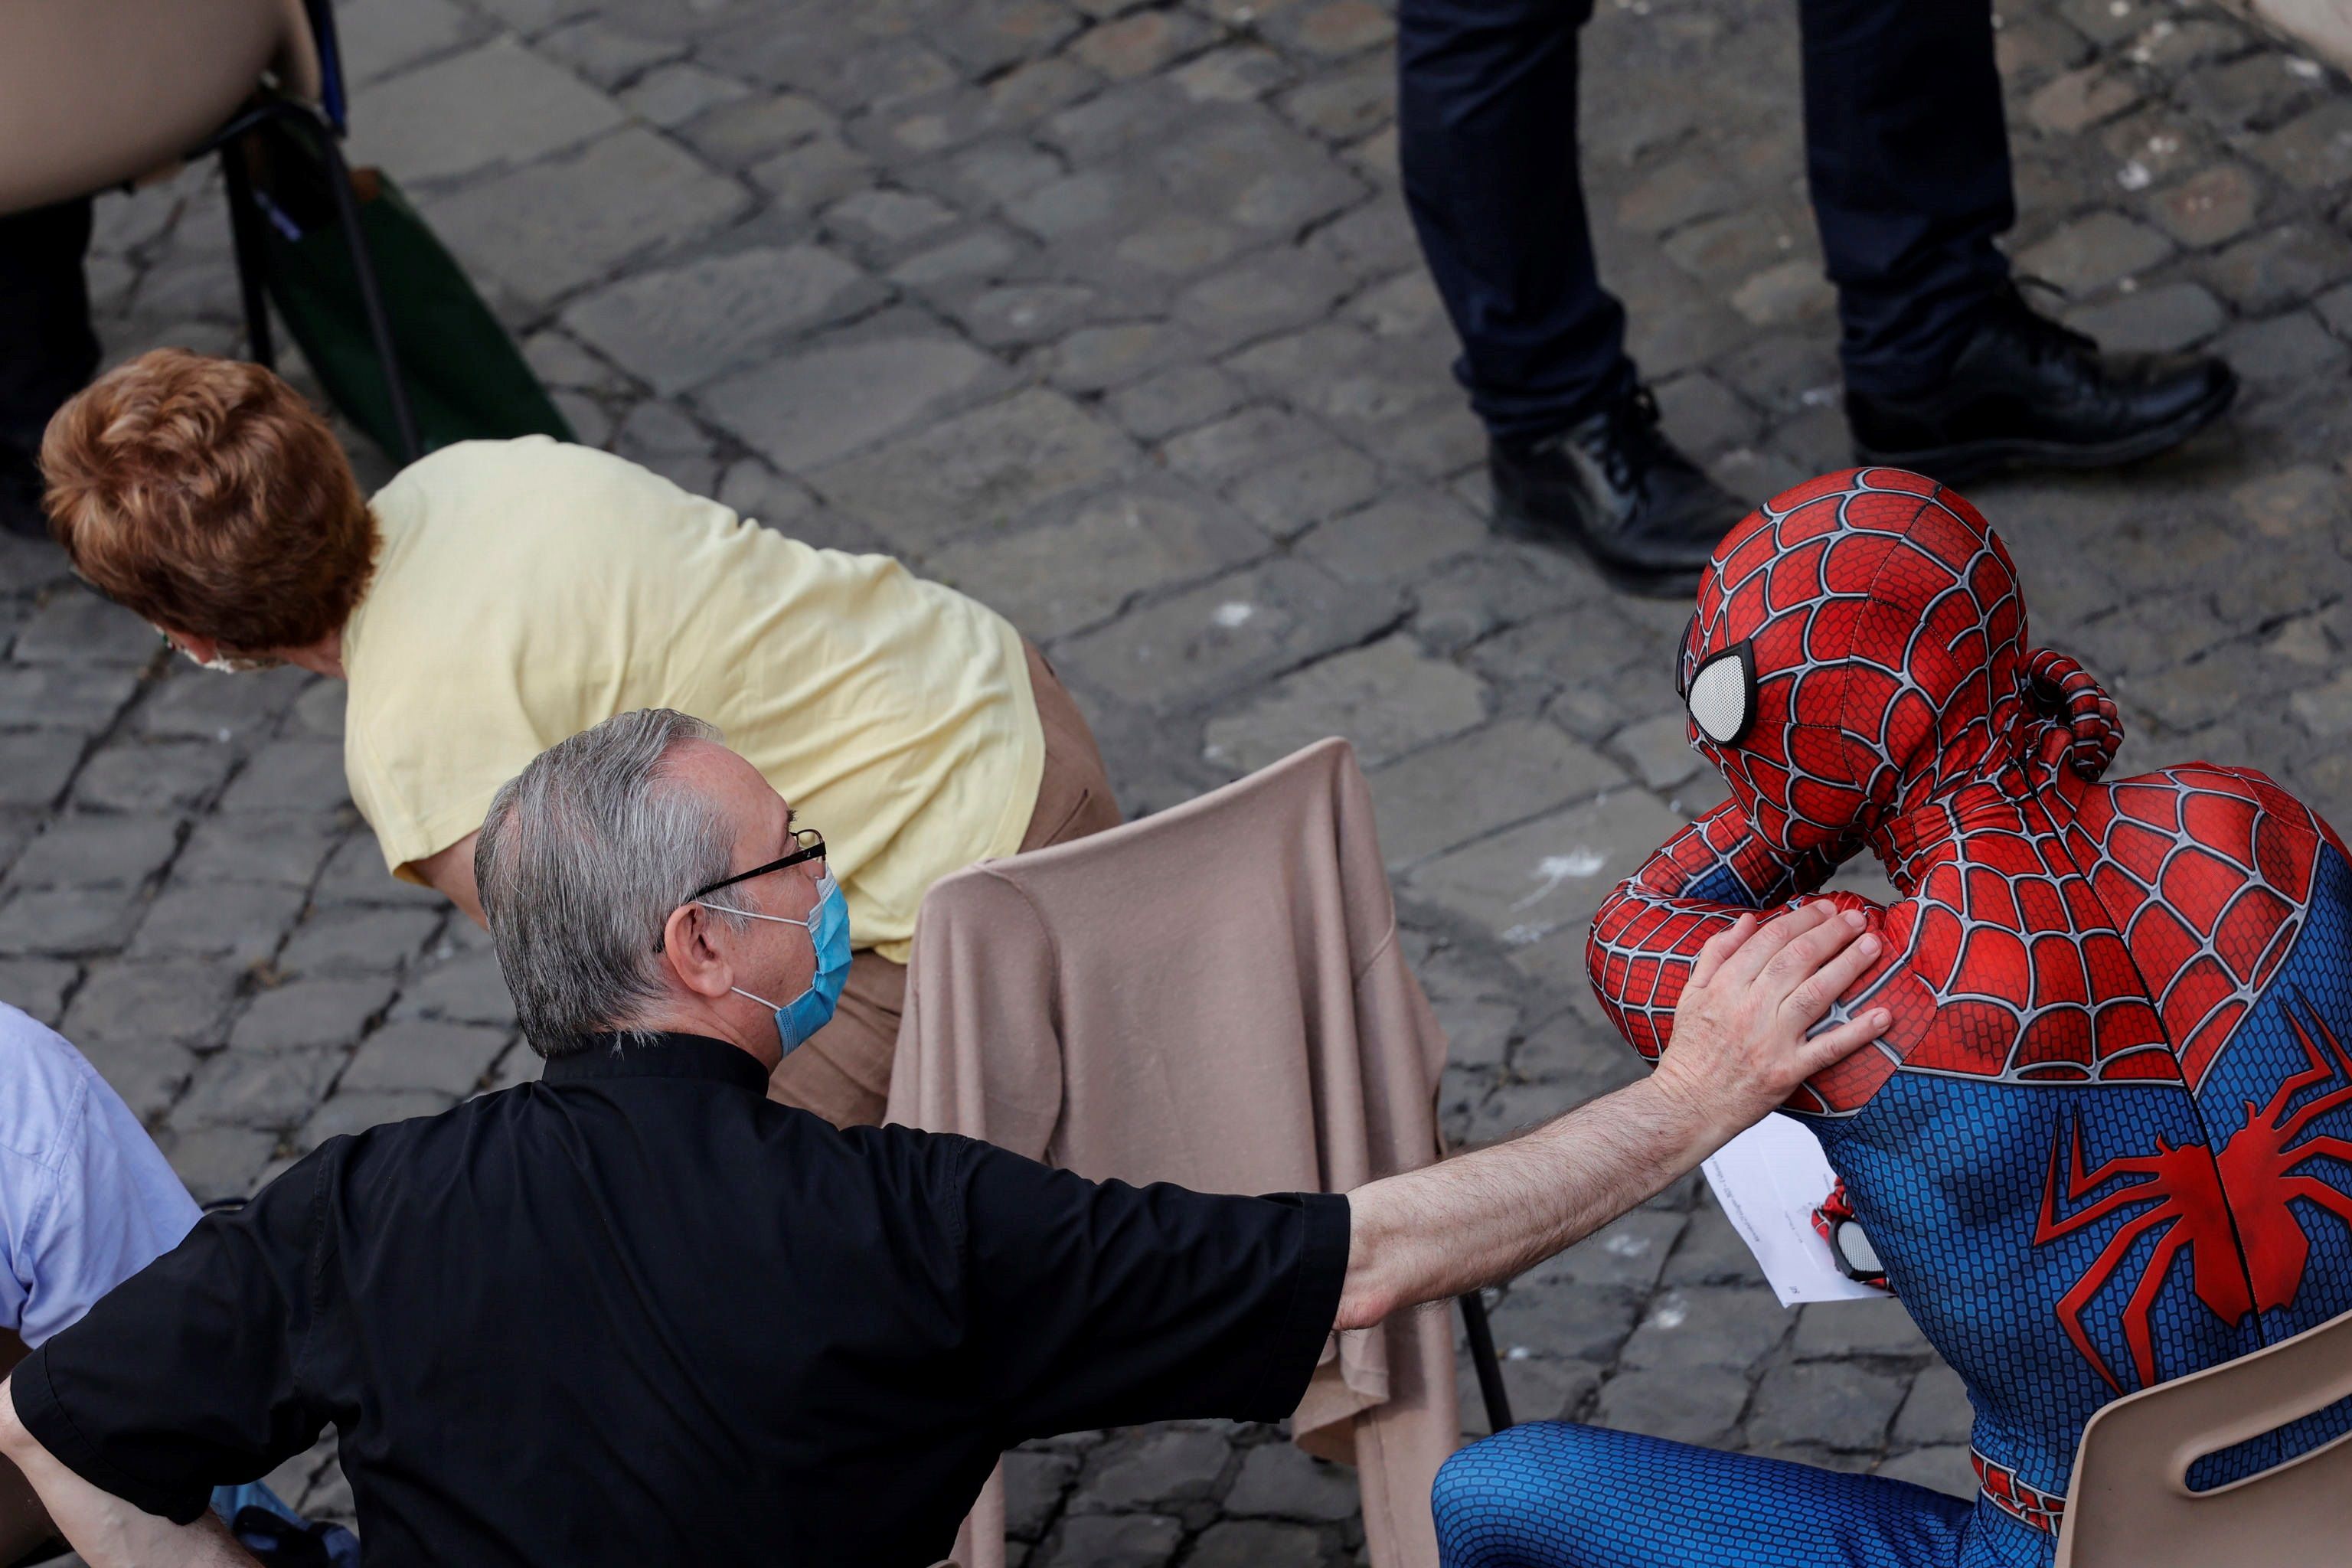 Vatican City (Vatican City State (holy See)), 23/06/2021.- A faithful in a Spiderman costume during the Pope's weekly General Audience in the San Damaso courtyard, Vatican City, 23 June 2021. The Vatican the previous day issued a diplomatic protest against Italy's Zan draft bill which is aimed at punishing acts of discrimination and incitement to violence against gay, lesbian, transgender and disabled people. (Papa, Protestas, Italia) EFE/EPA/GIUSEPPE LAMI
